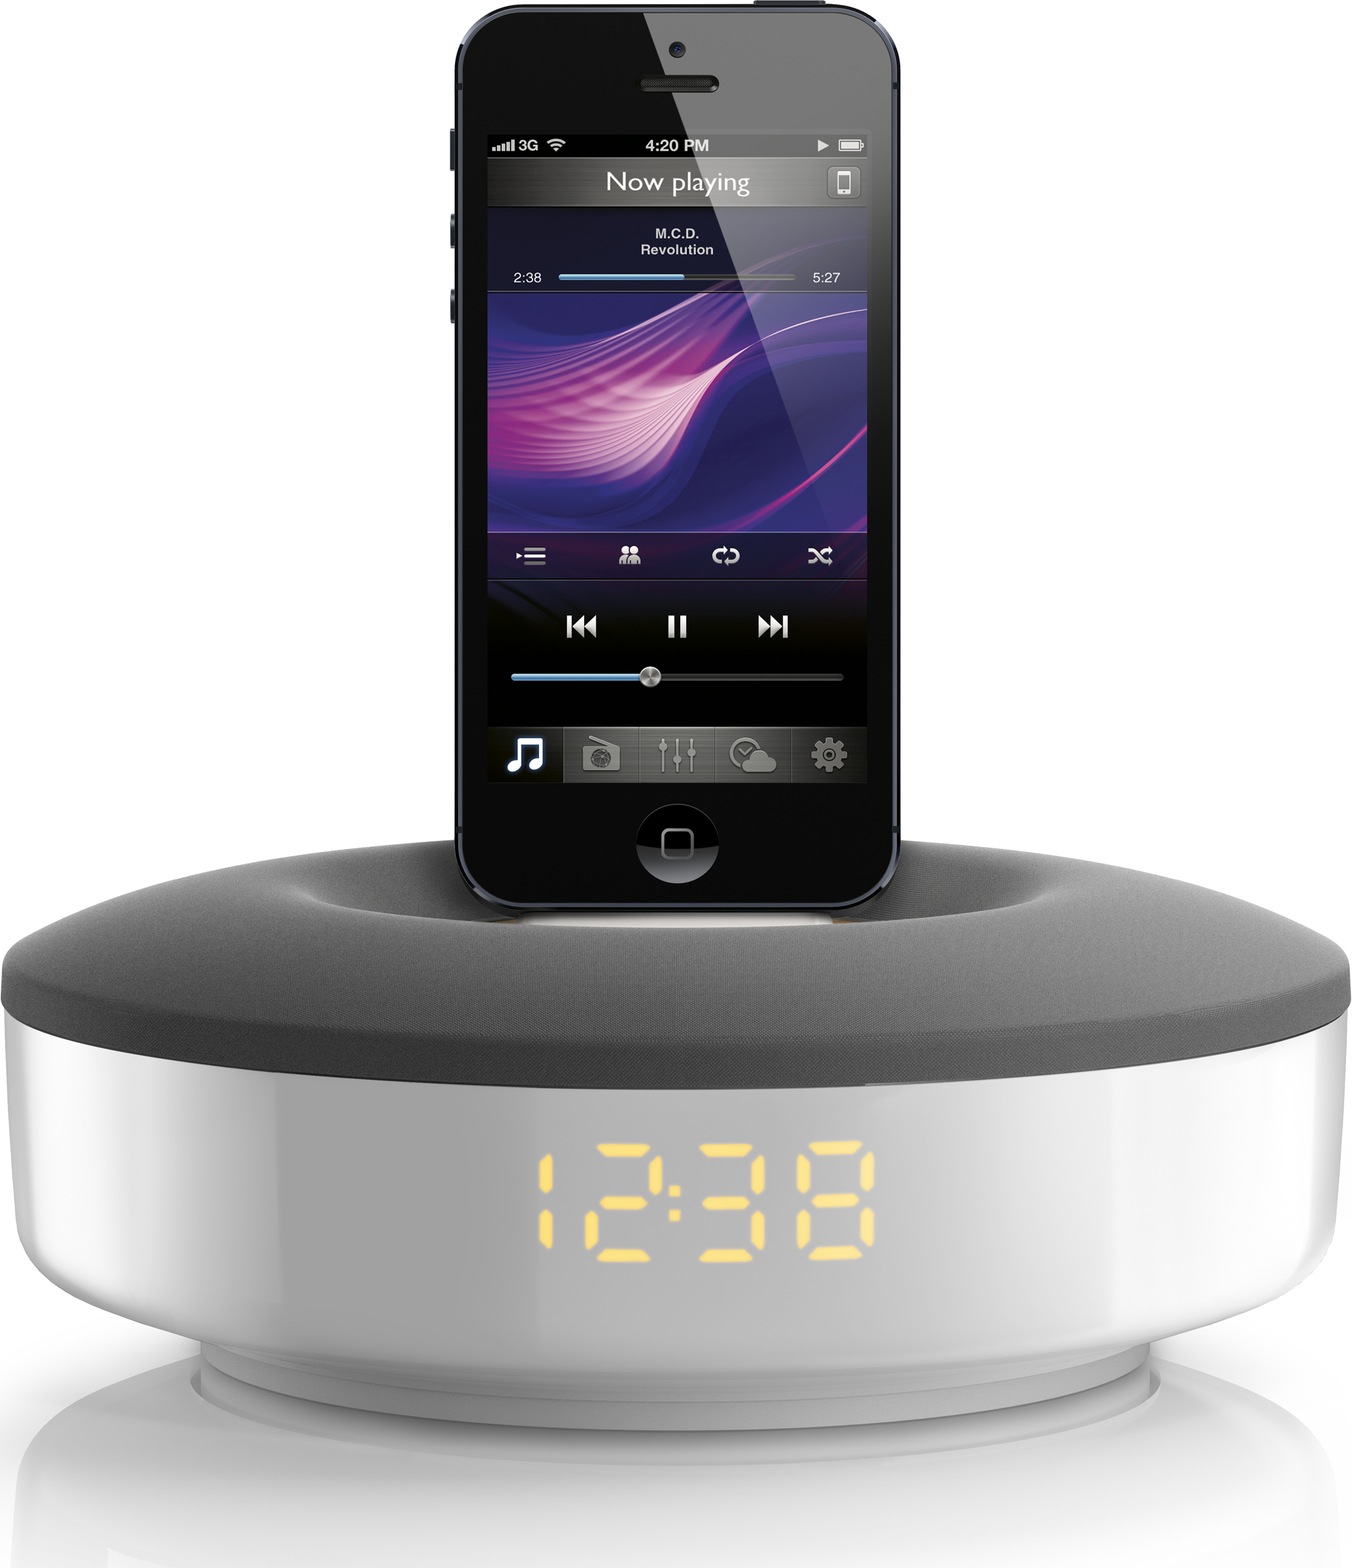 Resistente dedikation Snor Philips launches four new eye-candy speaker docks with Lightning I/O